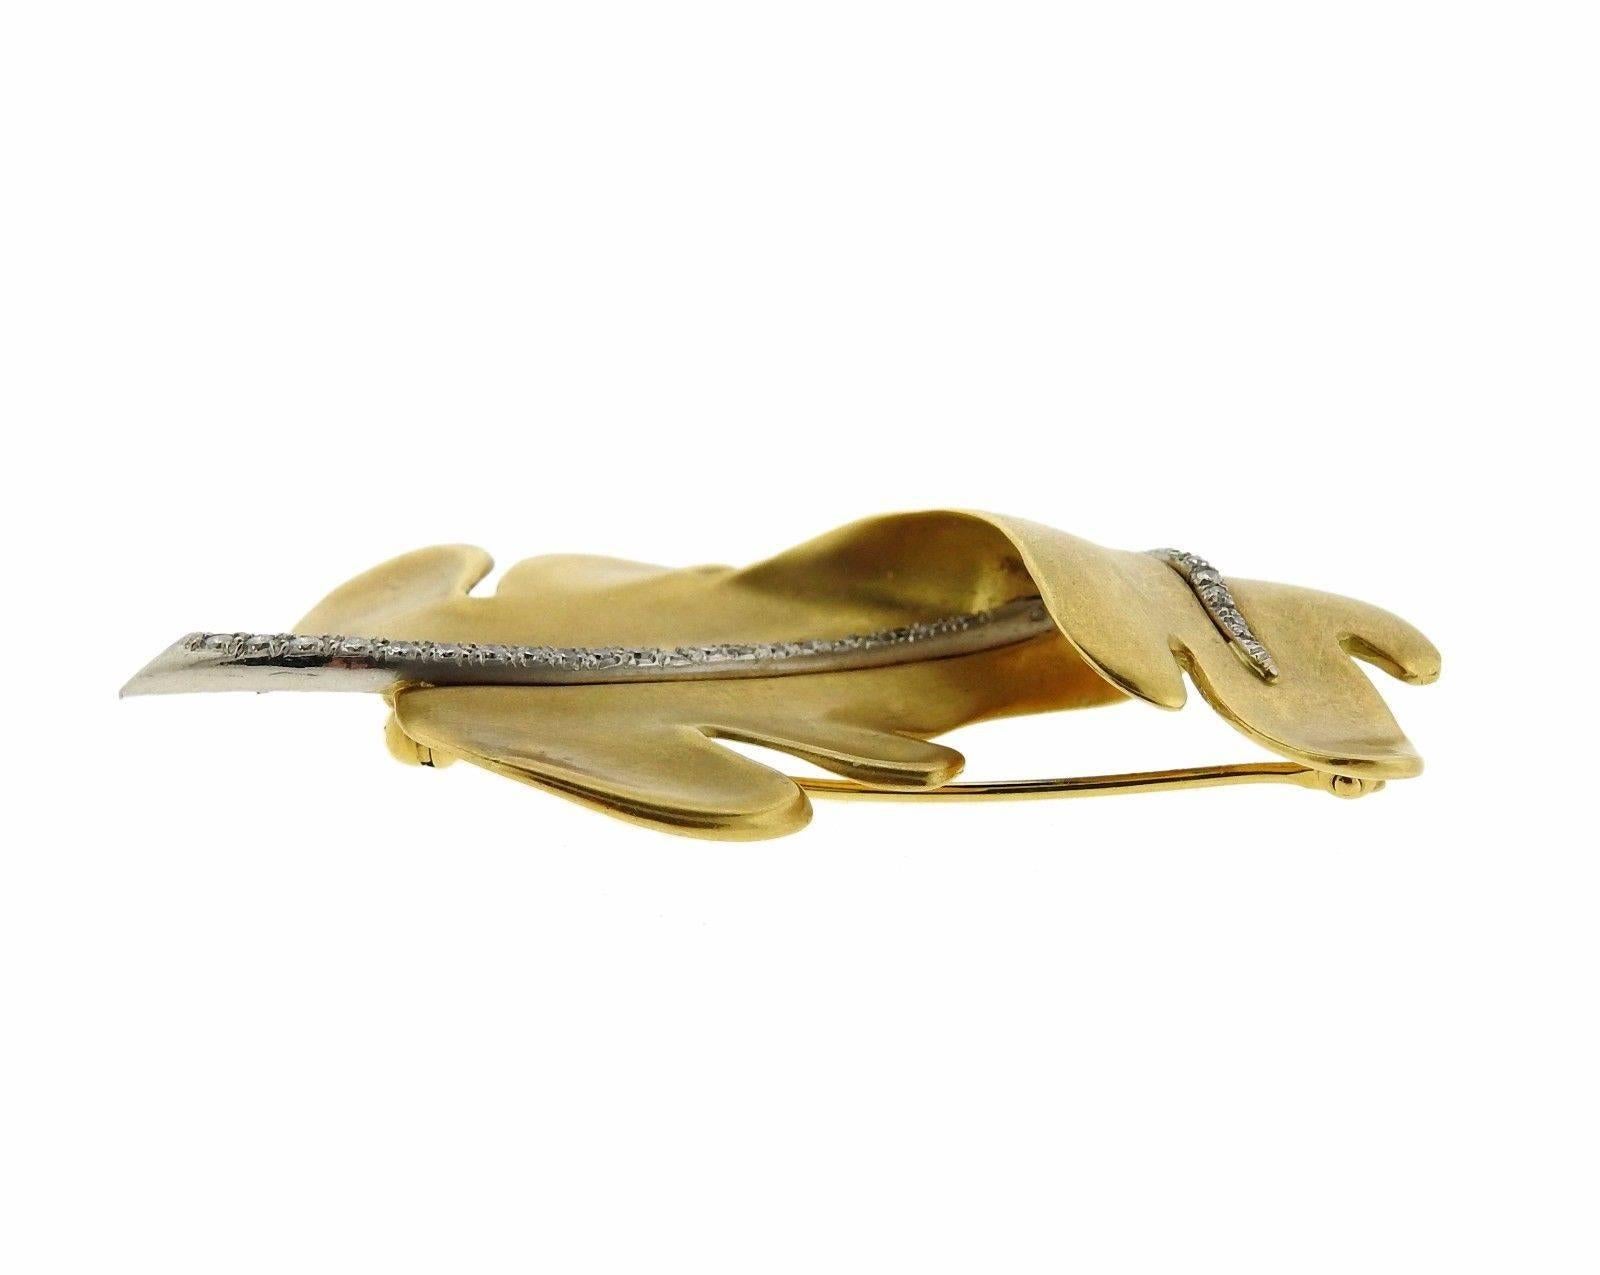 An 18k yellow gold leaf brooch set with approximately 0.20ctw of G/VS diamonds.  The brooch measures 55mm x 32mm and weighs 16.5 grams.  Marked: 1987, Tiffany & Co, 18k.